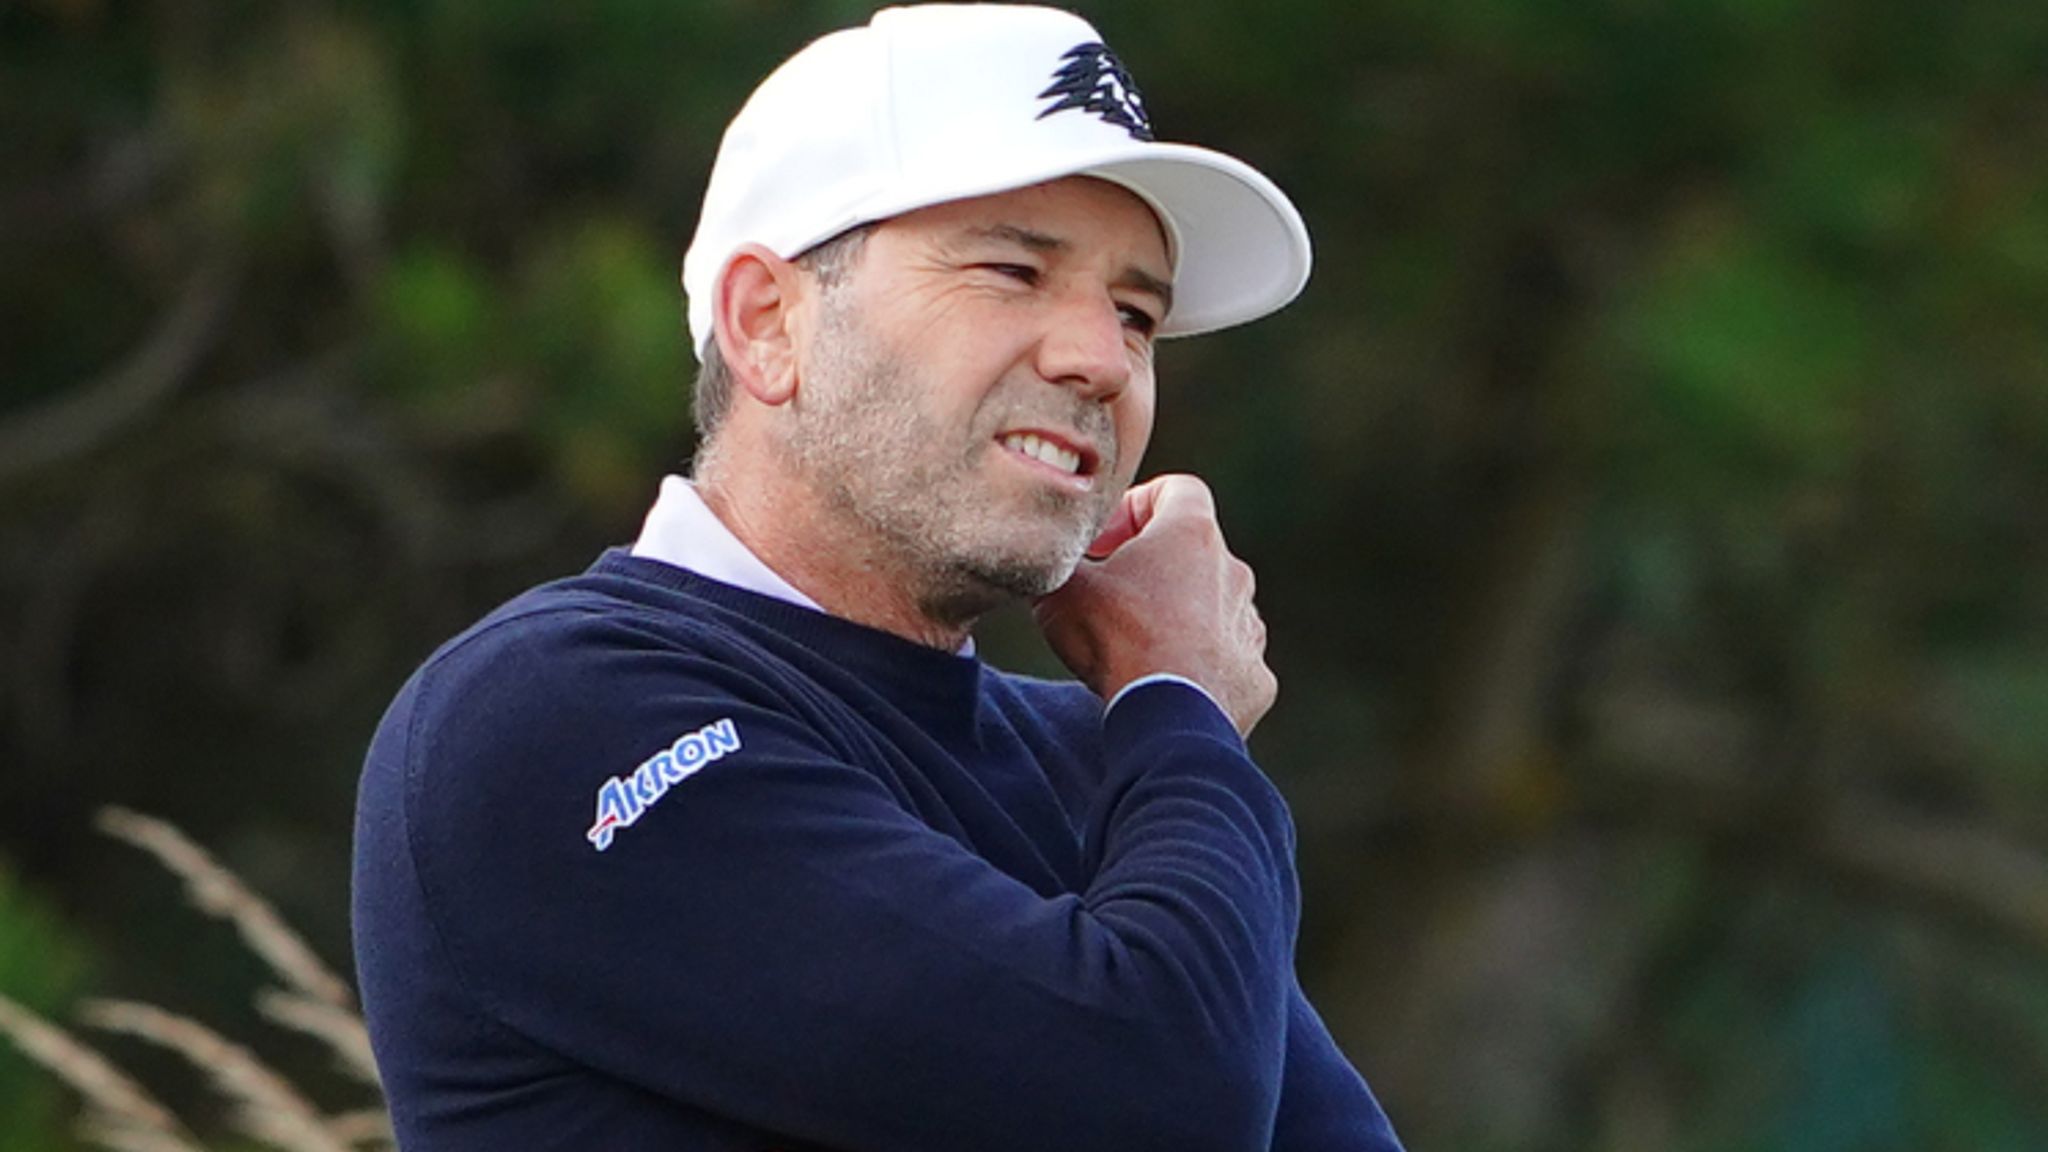 Report: Sergio Garcia Offered to Pay Fines to Get Into Ryder Cup; DP World Tour Says ‘No’